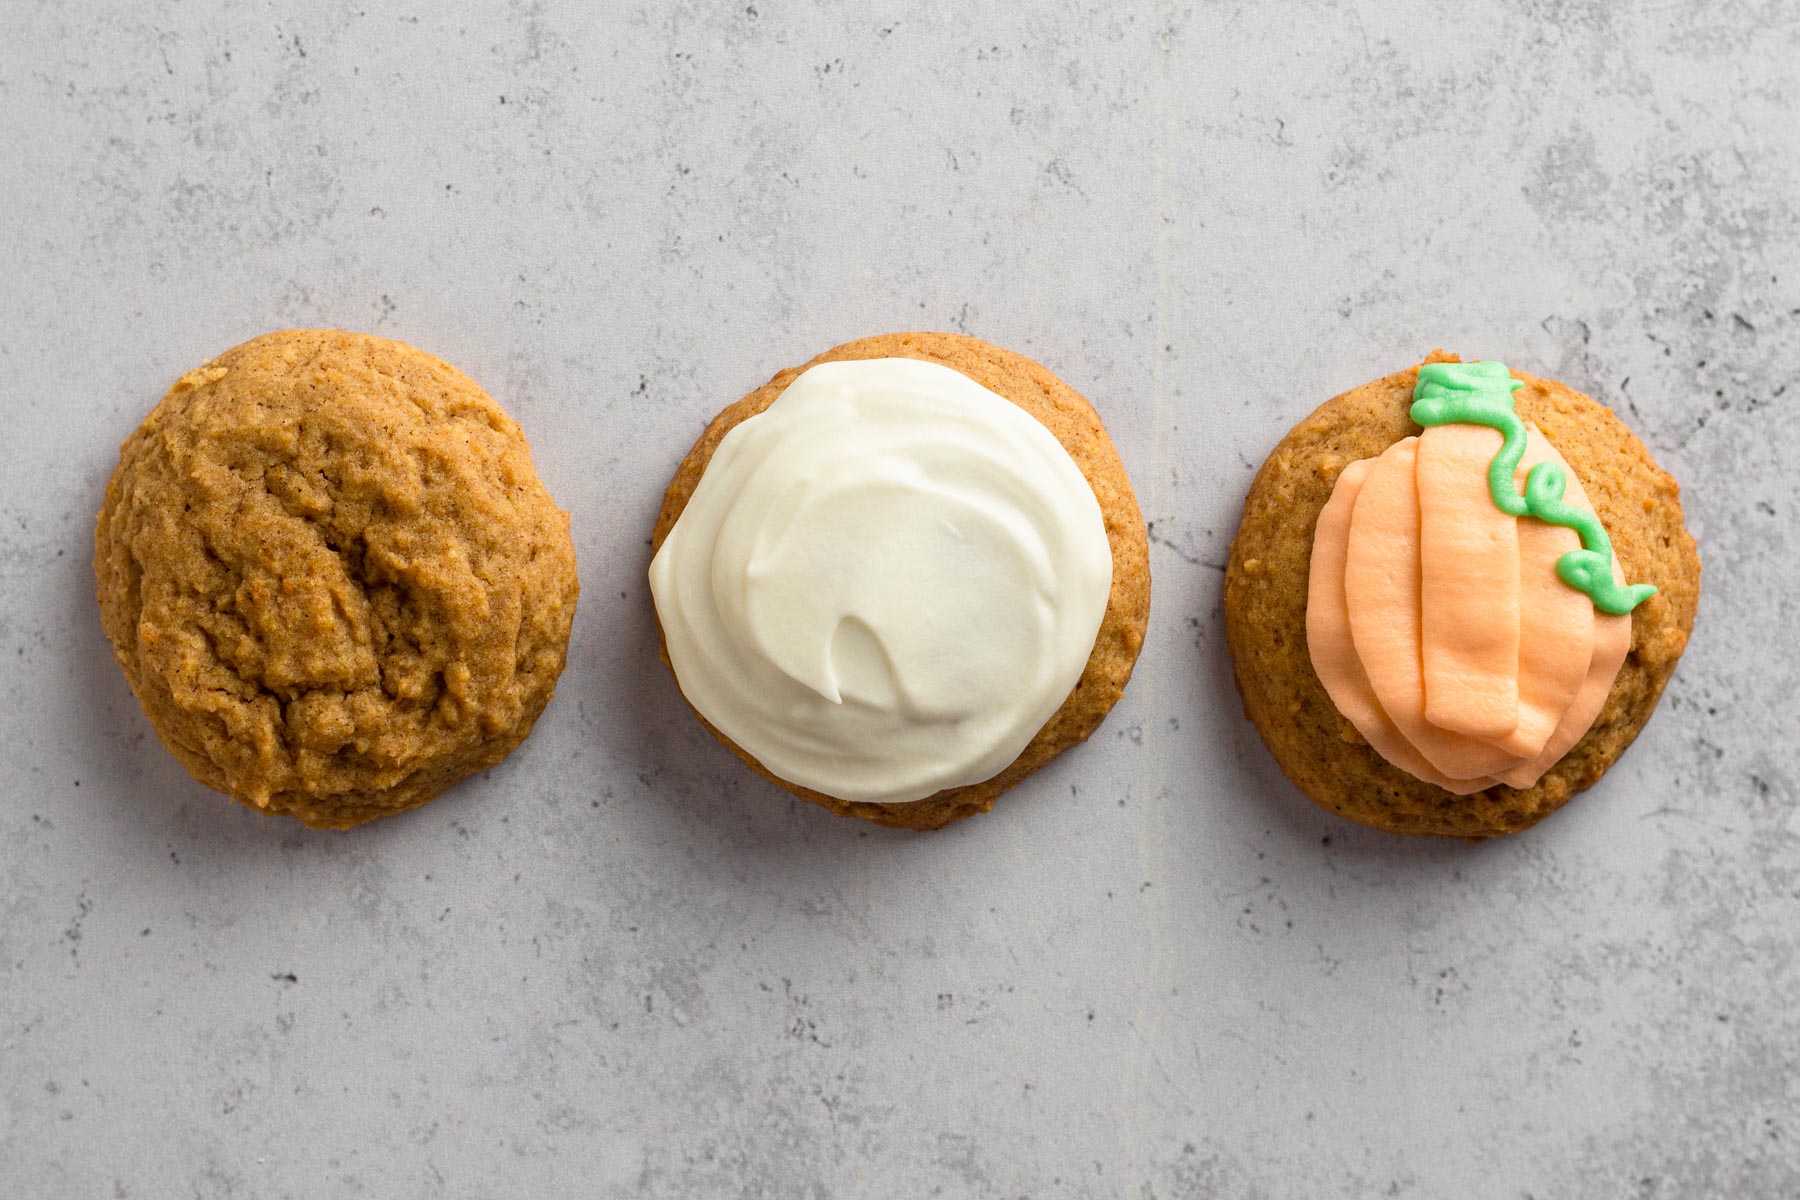 Three pumpkin cookies - one plain, one frosted, and one decorated - on a gray surface.